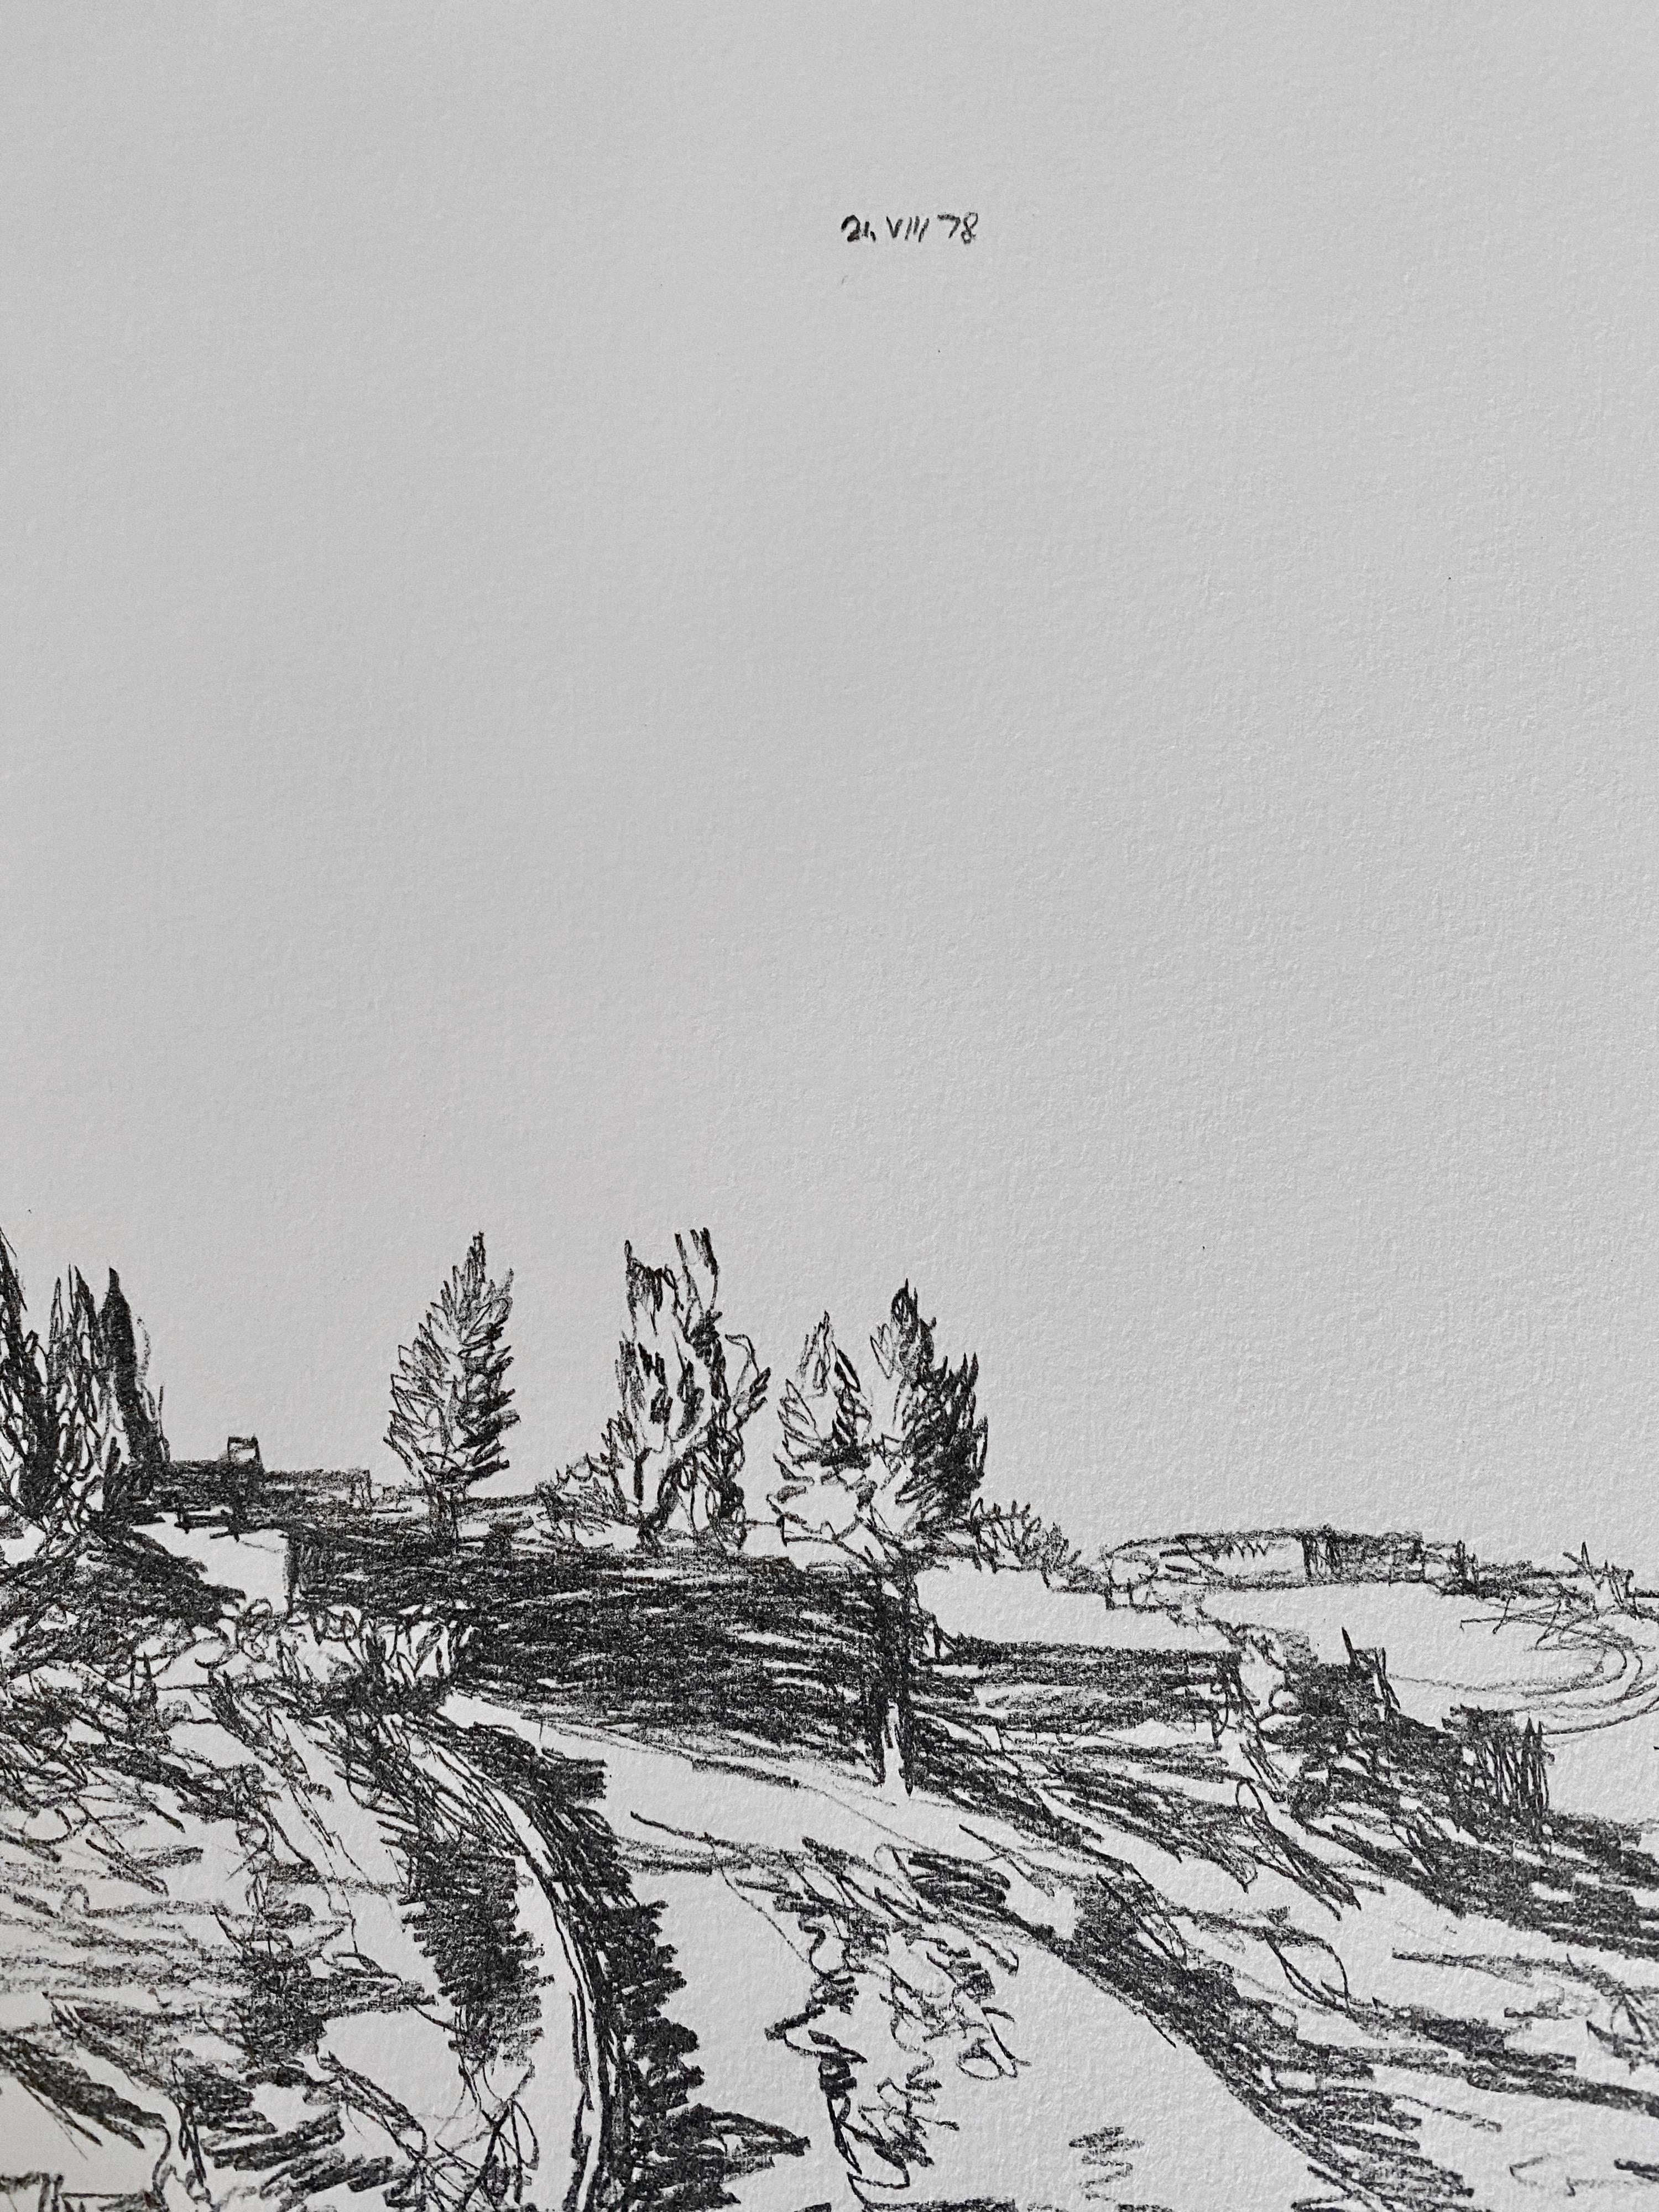 Hand signed in pencil and hand numbered lithograph on fine French Arches paper.
Jerusalem Landscape.

Avigdor Arikha (April 28, 1929 – April 29, 2010) was a Romanian-born French–Israeli painter, draughtsman, printmaker, and art historian.
Avigdor